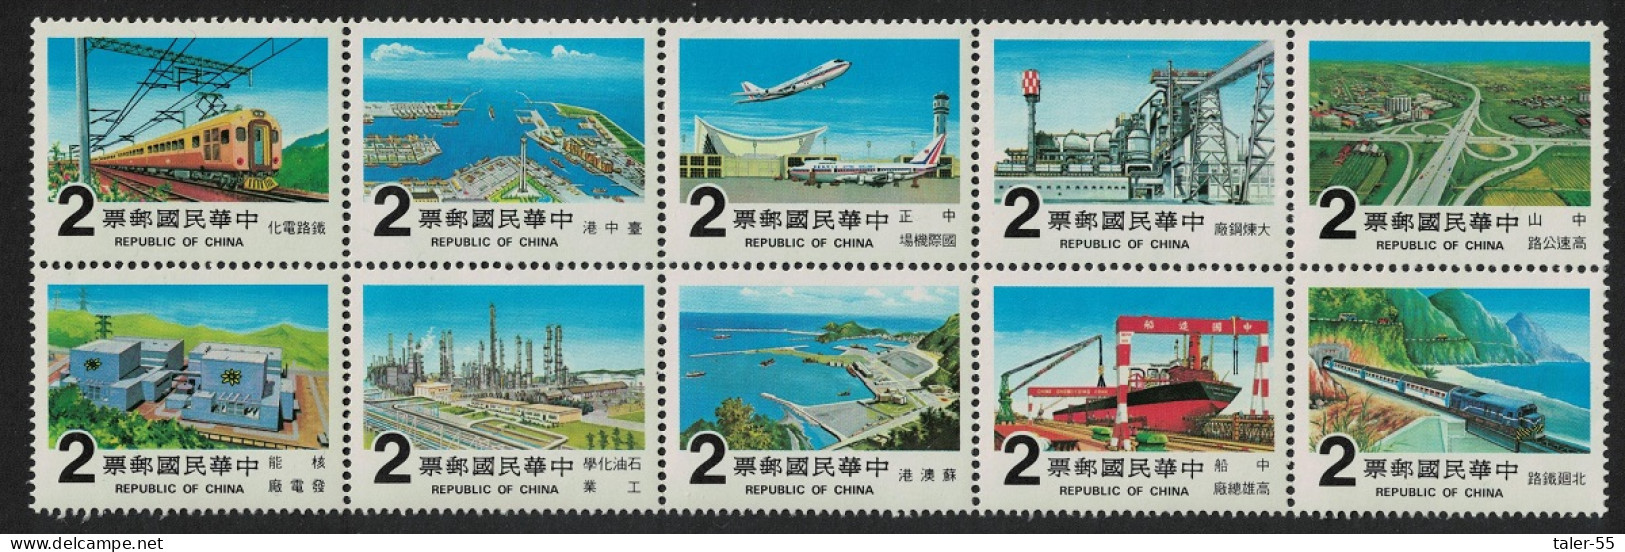 Taiwan Completion Of Ten Major Construction Projects 10v 1980 MNH SG#1316-1325 - Ungebraucht